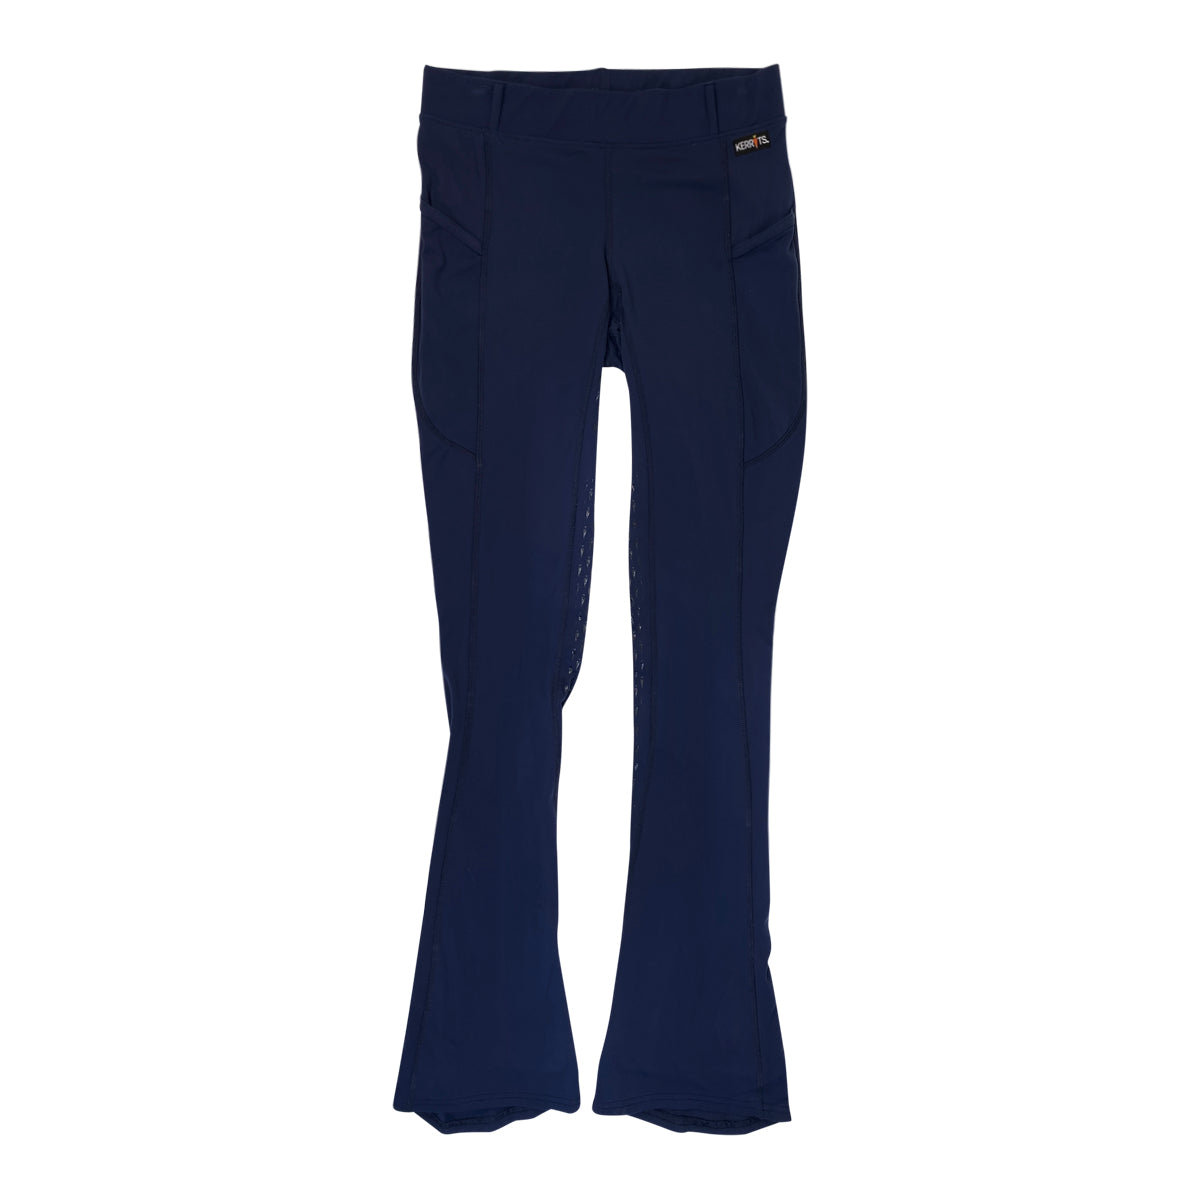 Kerrits 'IceFil' Tech Tights in Admiral Blue